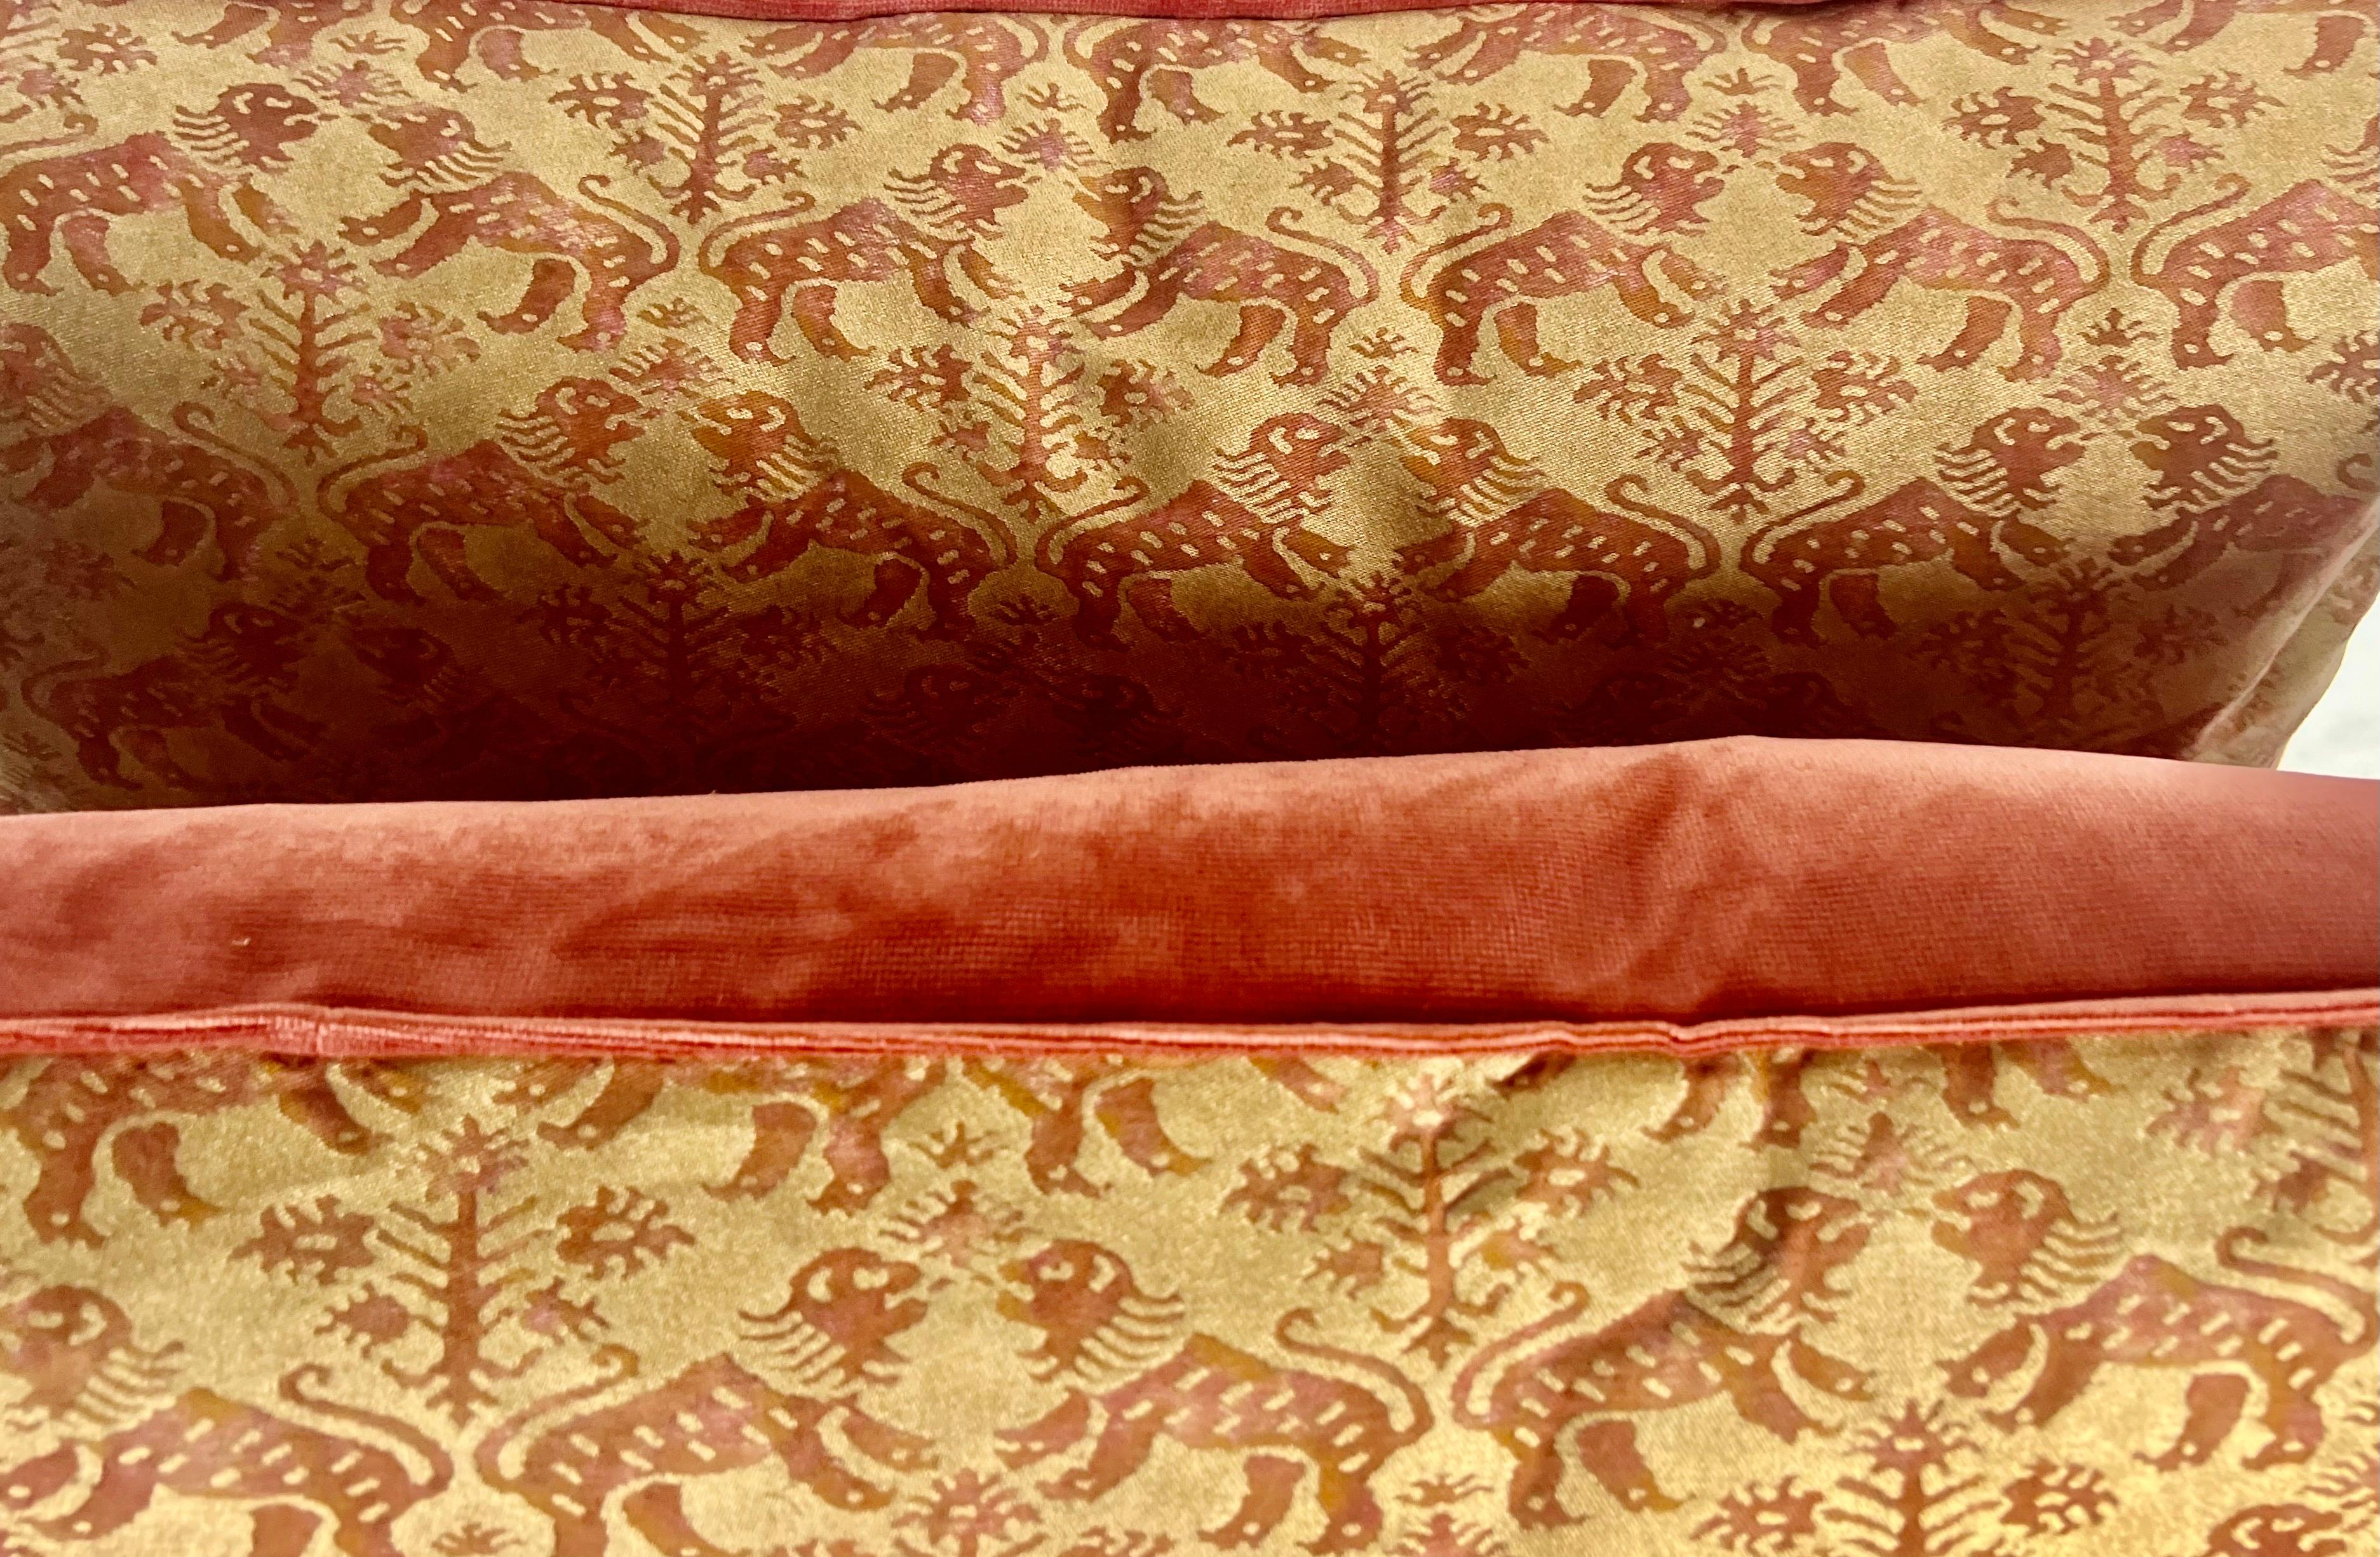 Italian Pair of Richeleau Patterned Fortuny Rust & Gold Pillows 